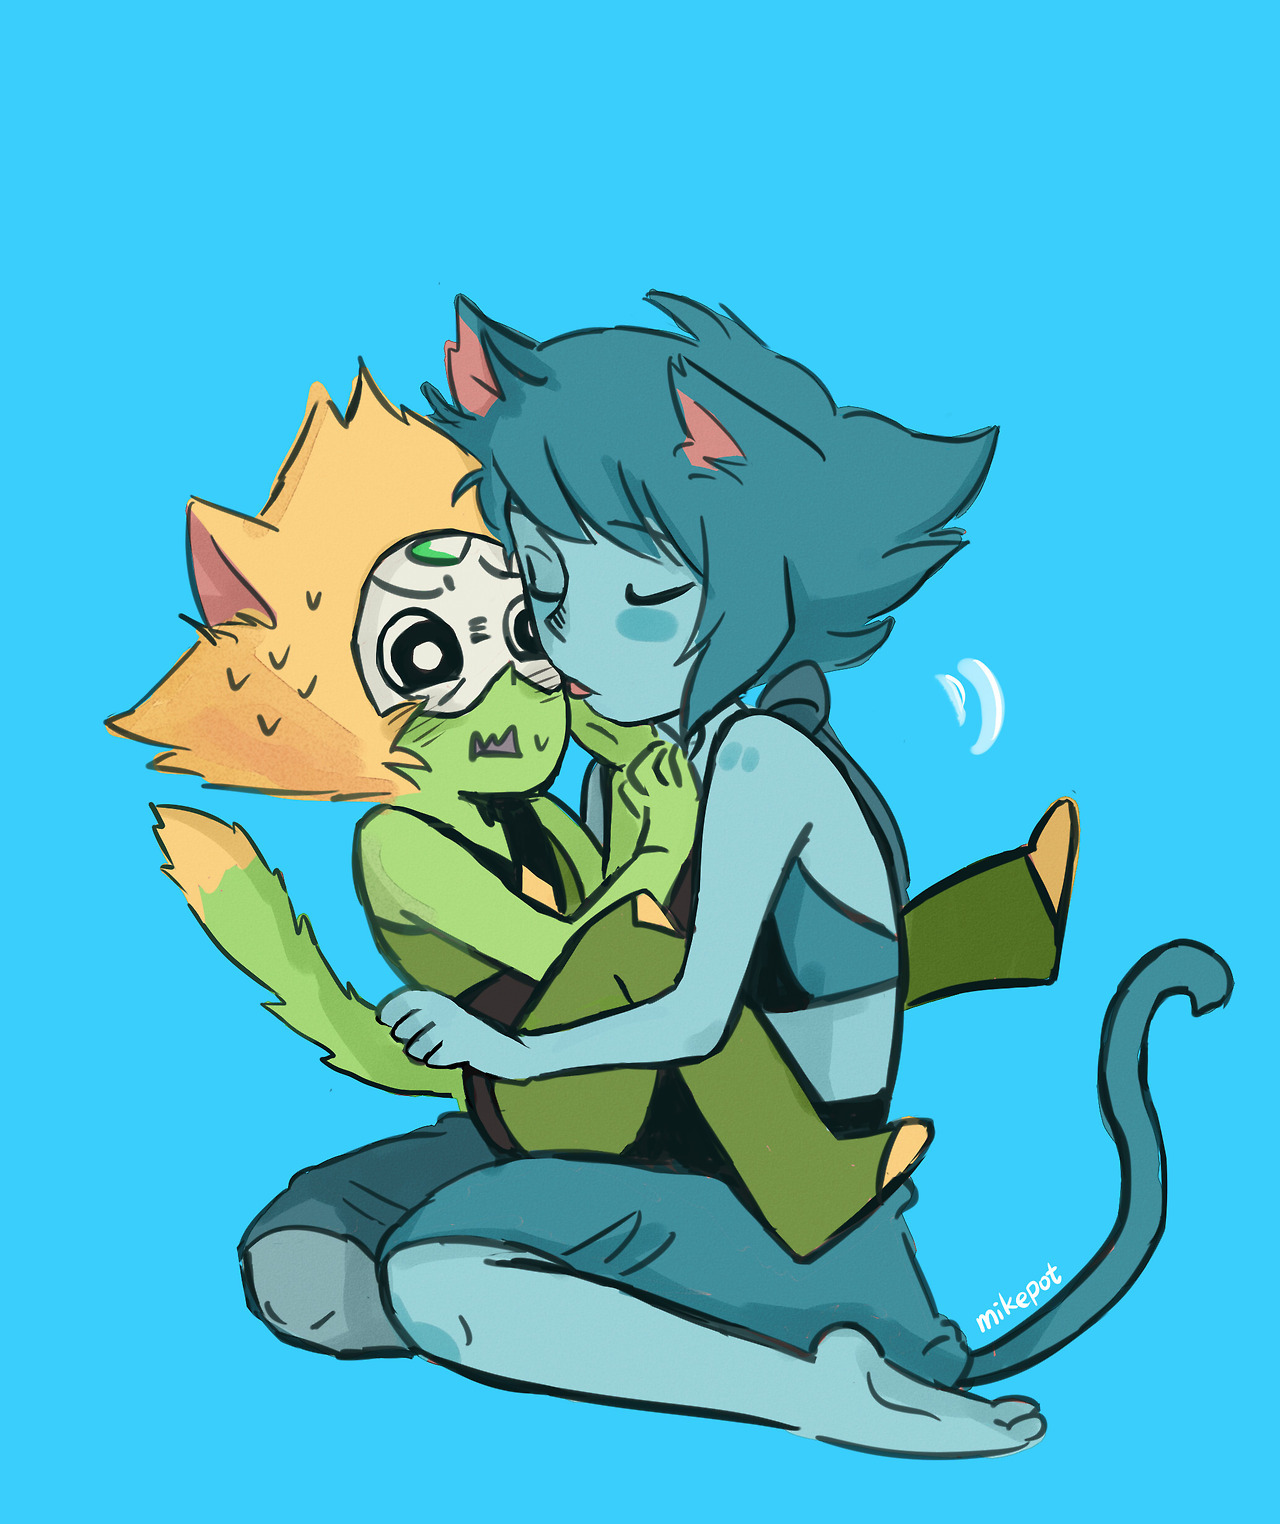 yes, more lapidot :O